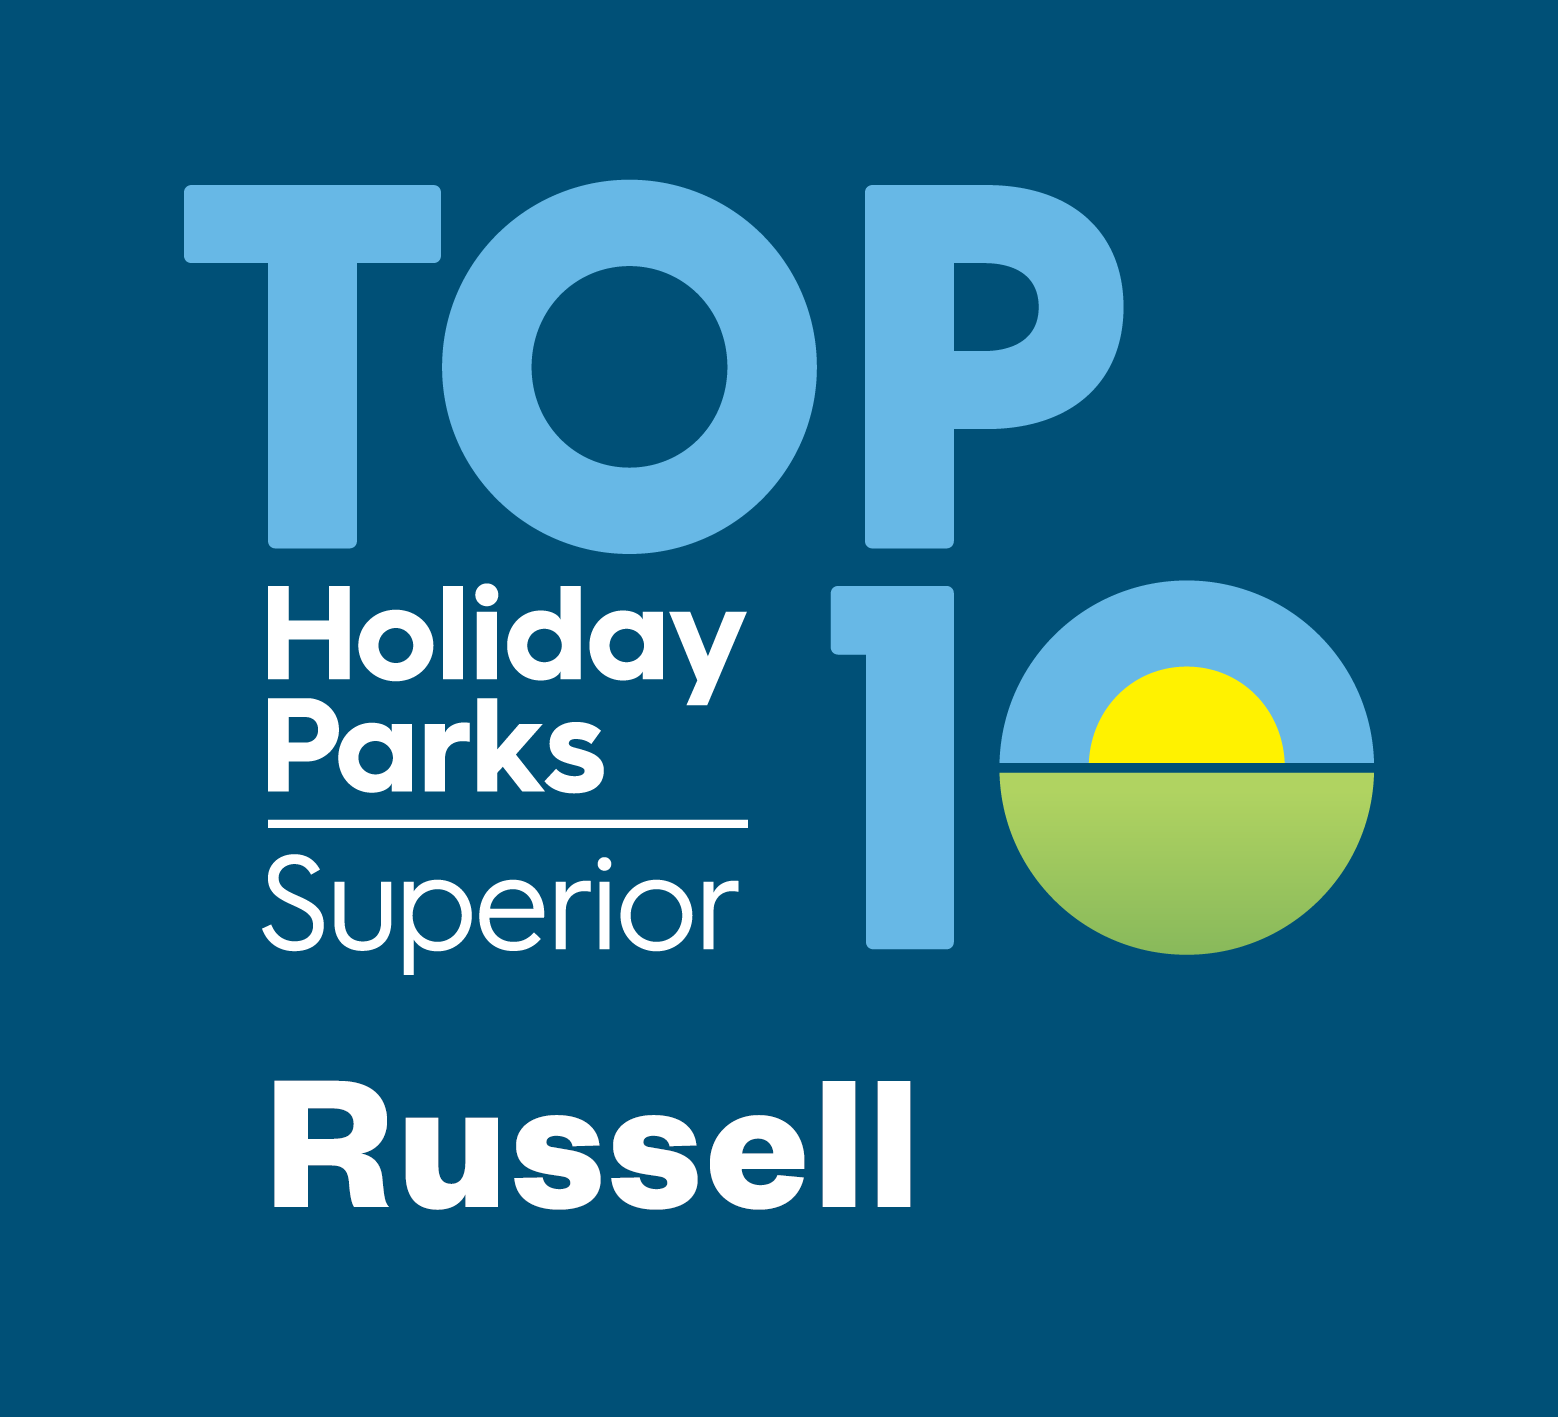 Russell TOP 10 Holiday Park